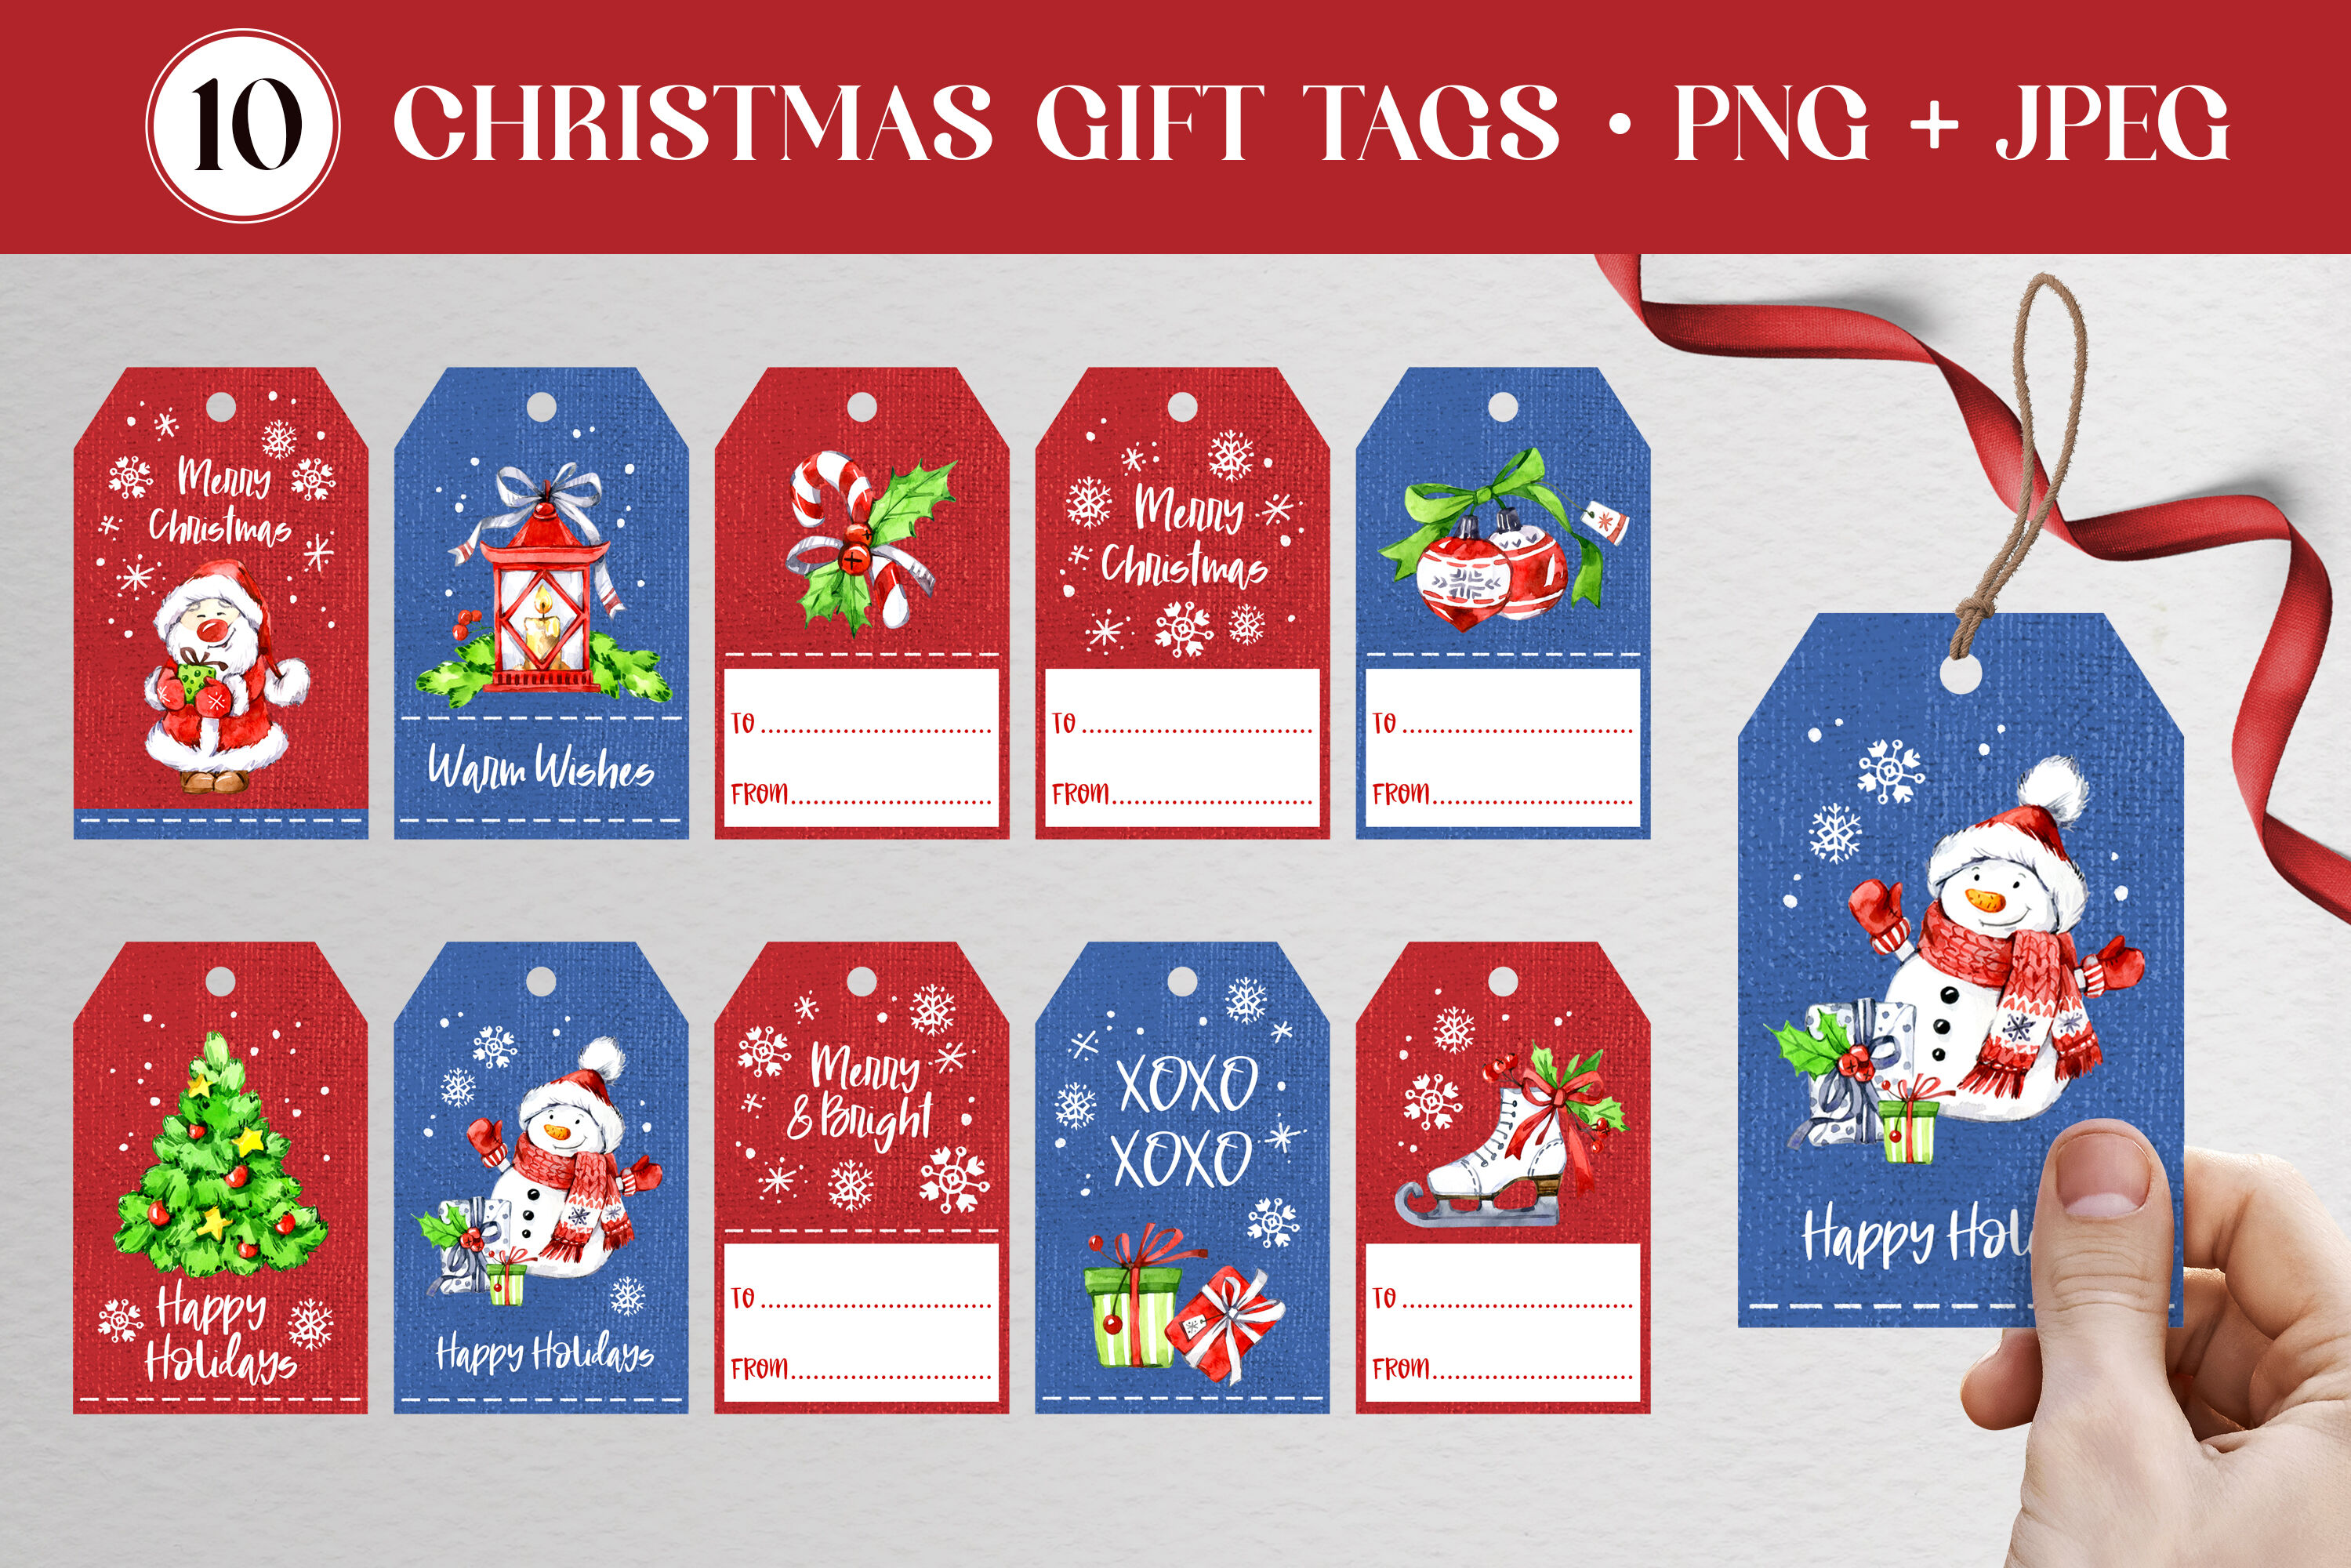 10 Crafty Ways To Hang Gift Tags on Party Gifts, Gift Elements SG